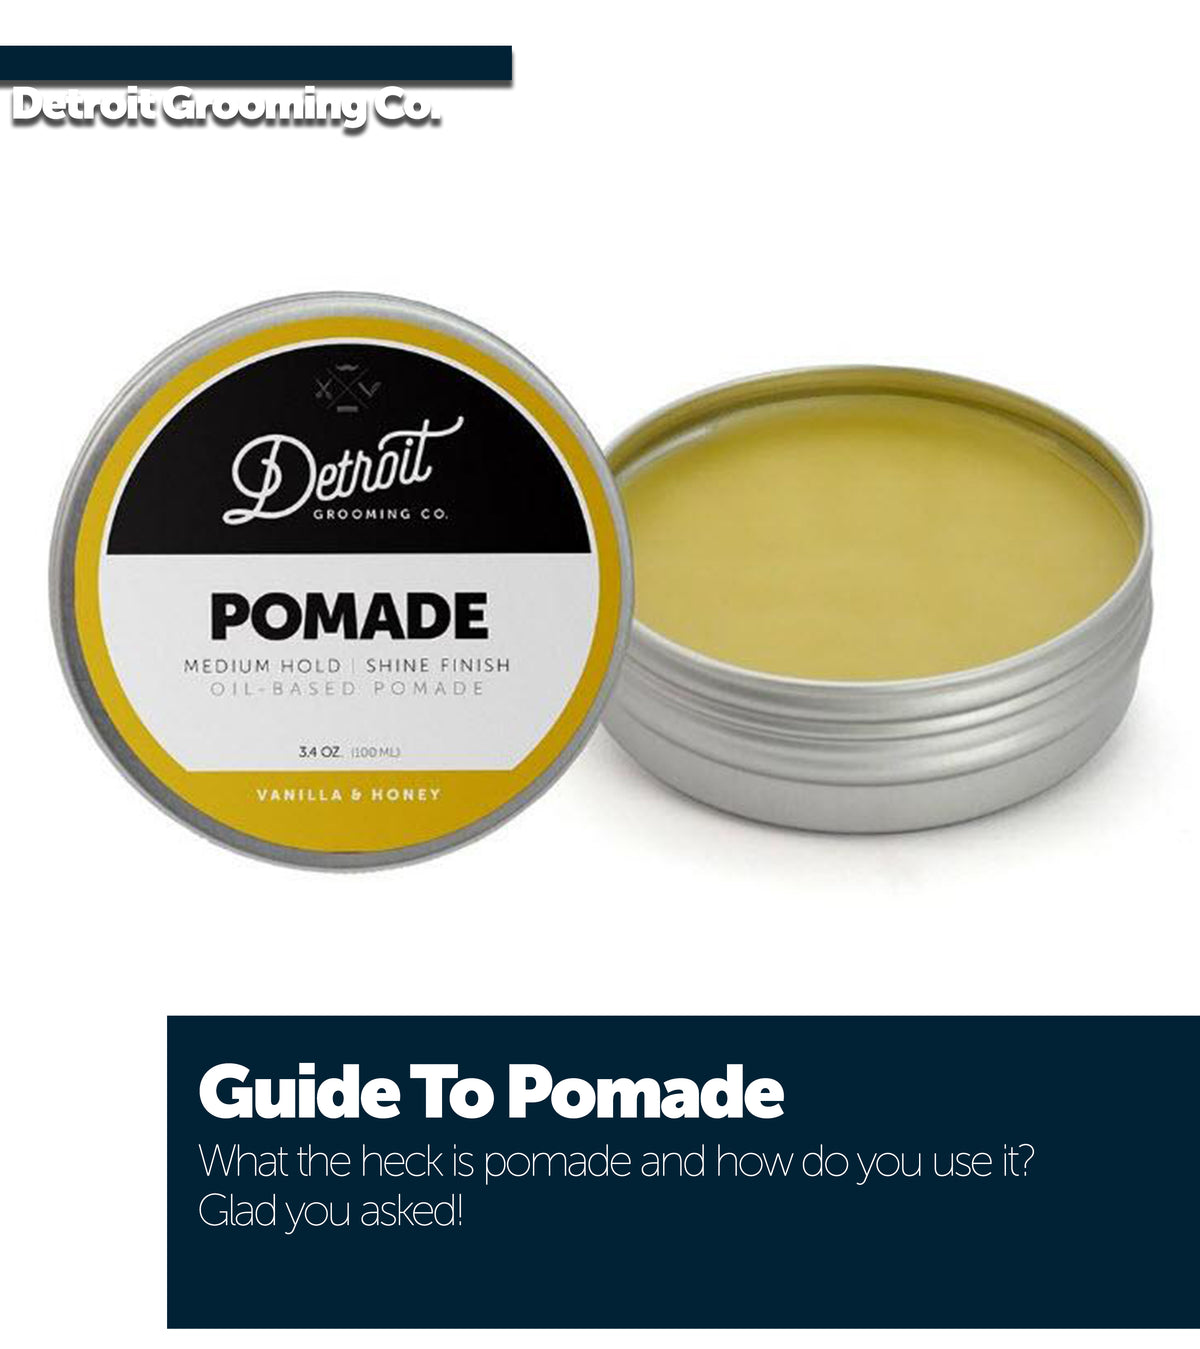 Detroit Grooming Co.'s Guide To Pomade